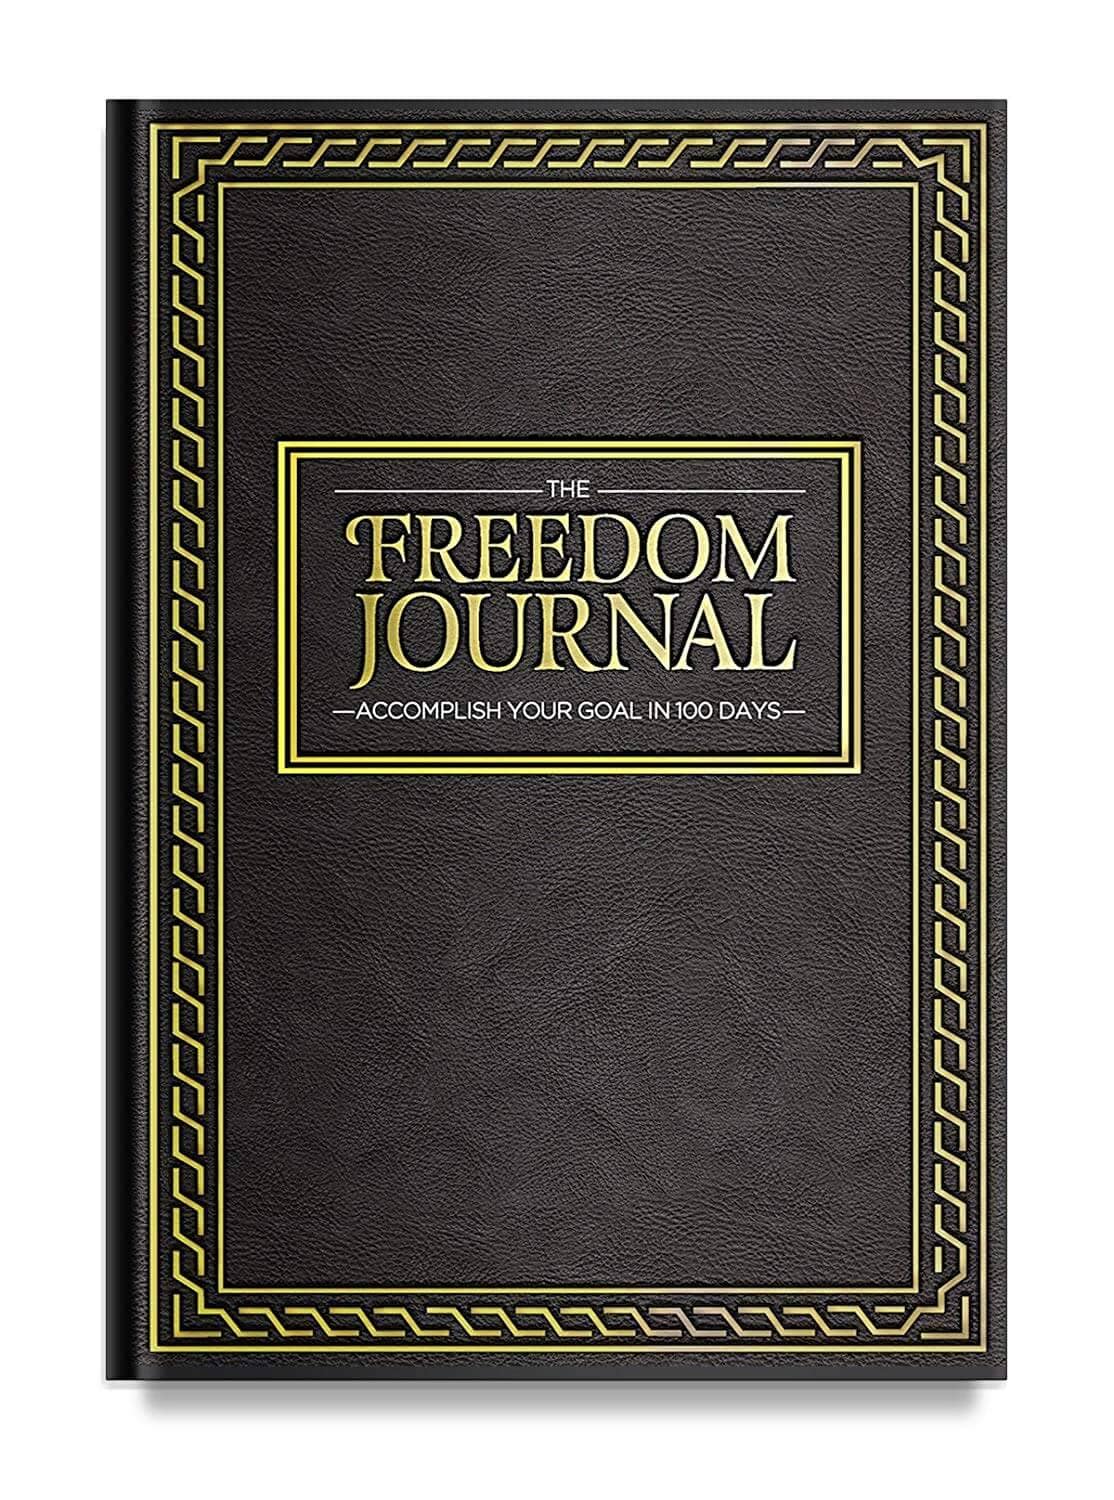 The-Freedom-Journal-The-Best-Daily-Planner-to-Accomplish-Your-number-1-Goal-in-100-Days